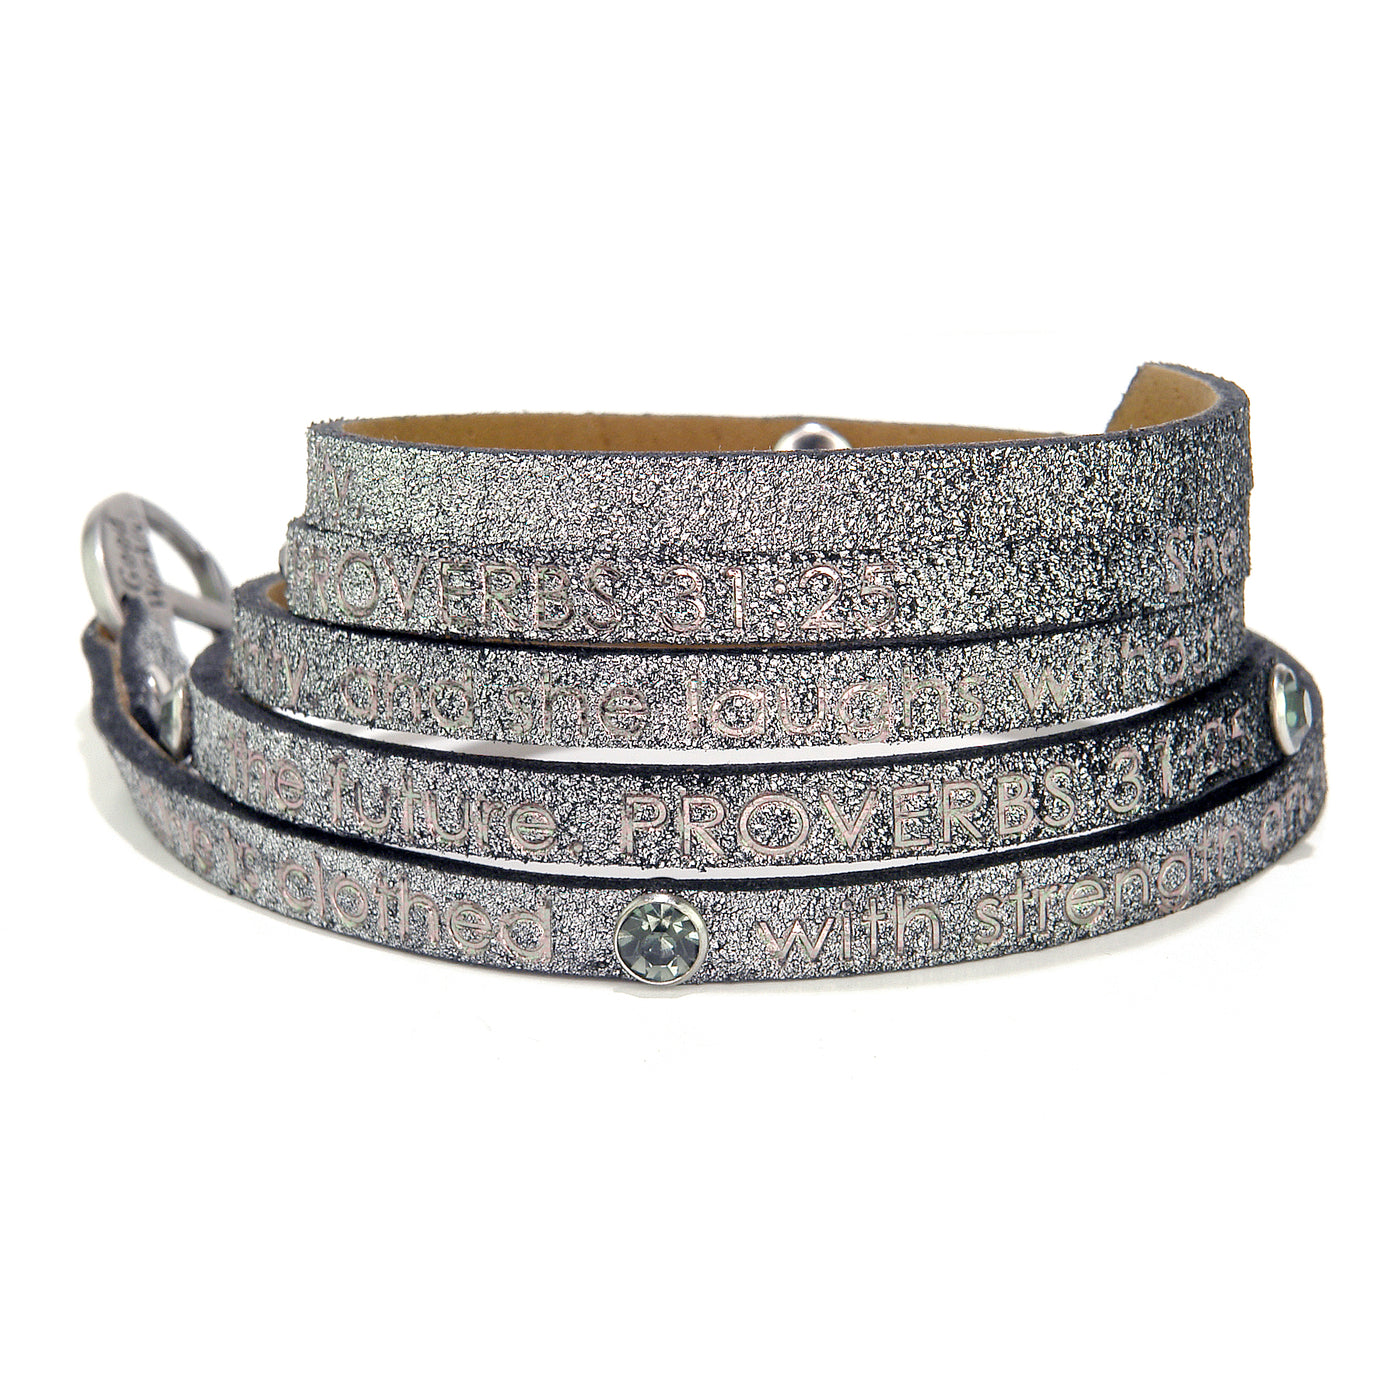 Bible Verse Wrap Around with Crystals - Proverbs 31:25 - Stardust Gunmetal-Good Work(s) Make A Difference® | Christian and Inspirational Jewelry Company in Vernon, California